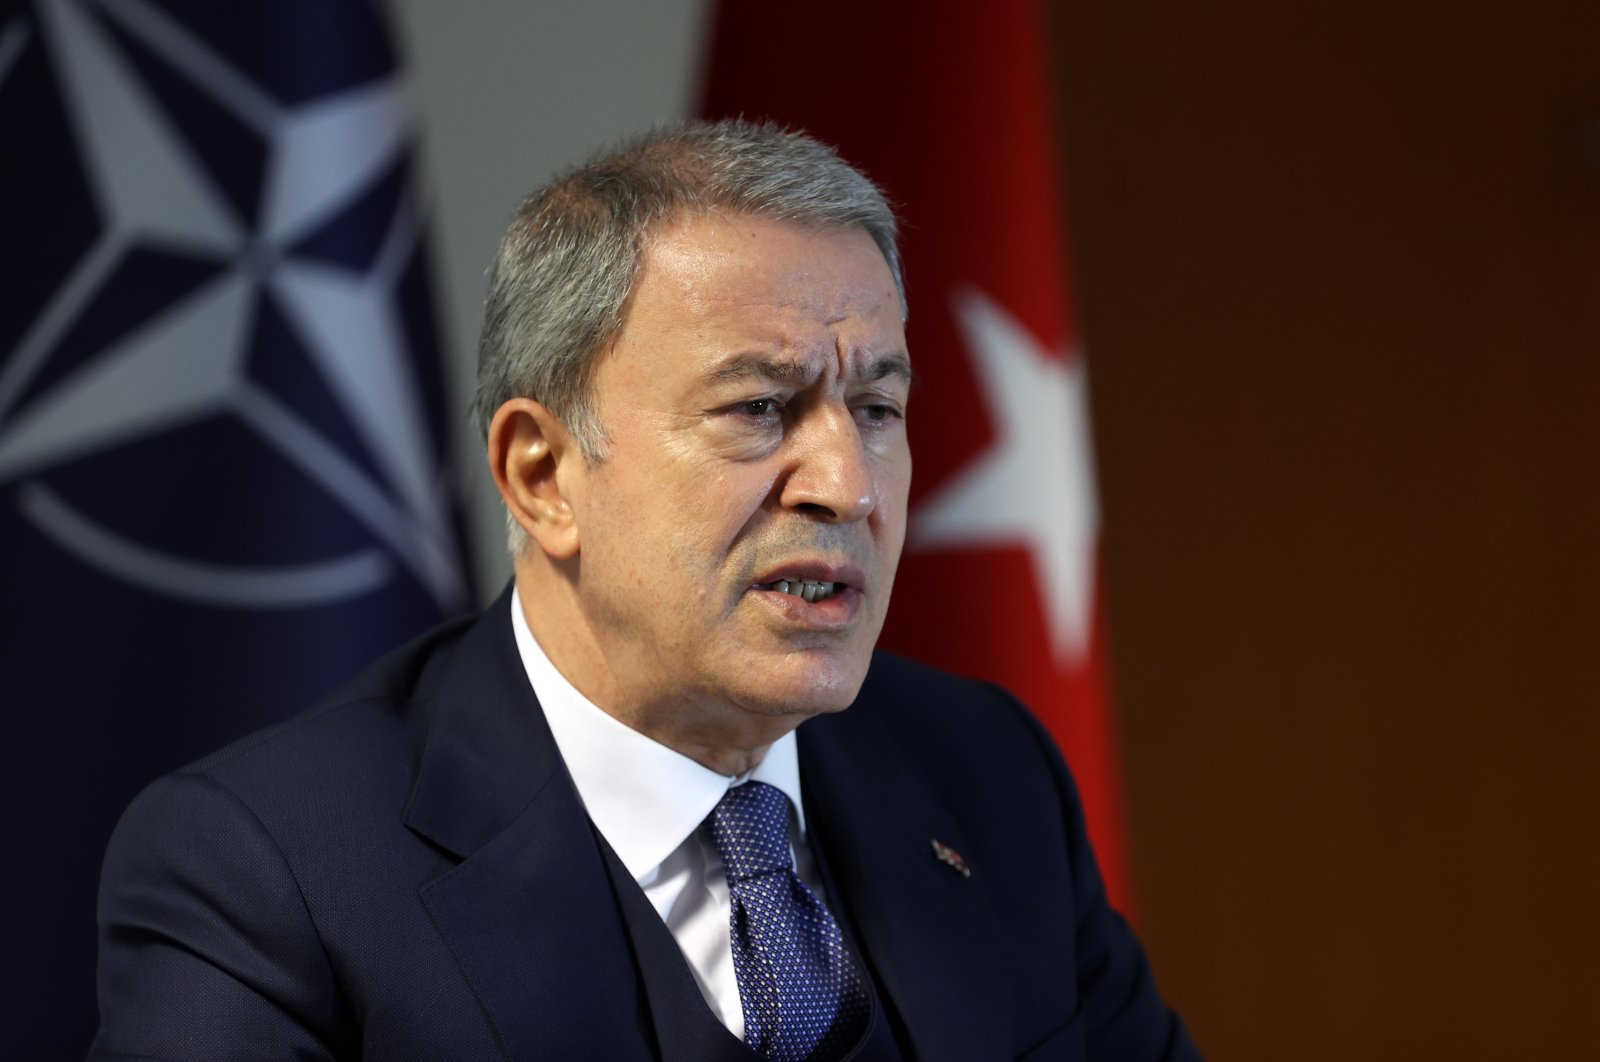 Defense Minister Hulusi Akar speaks at the Ukraine Defense Contact Group meeting at the Ramstein Air Base in Germany, Jan. 21, 2023. (AA Photo)